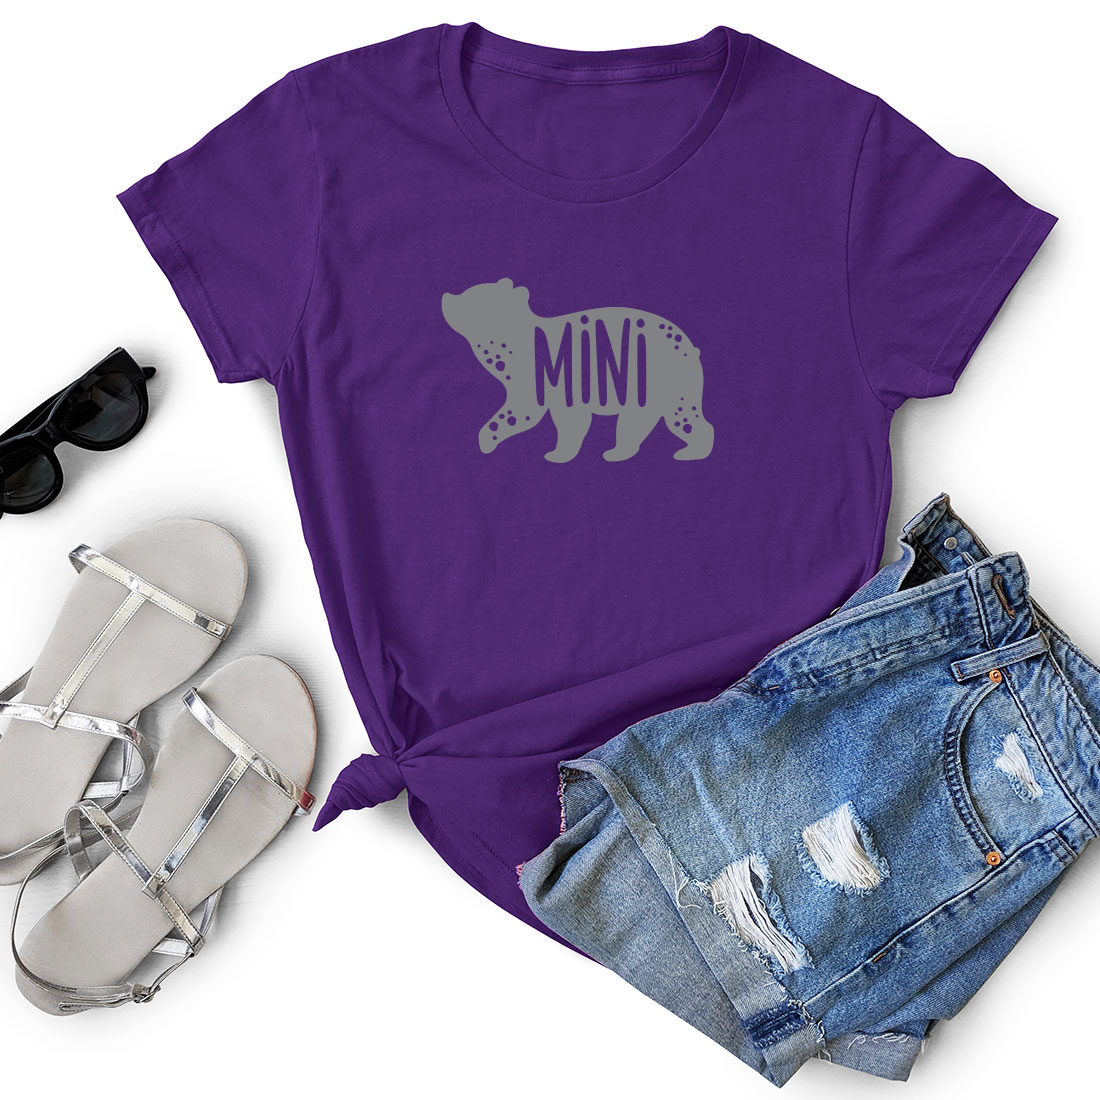 Purple shirt with the word minn on it next to a pair of shorts.